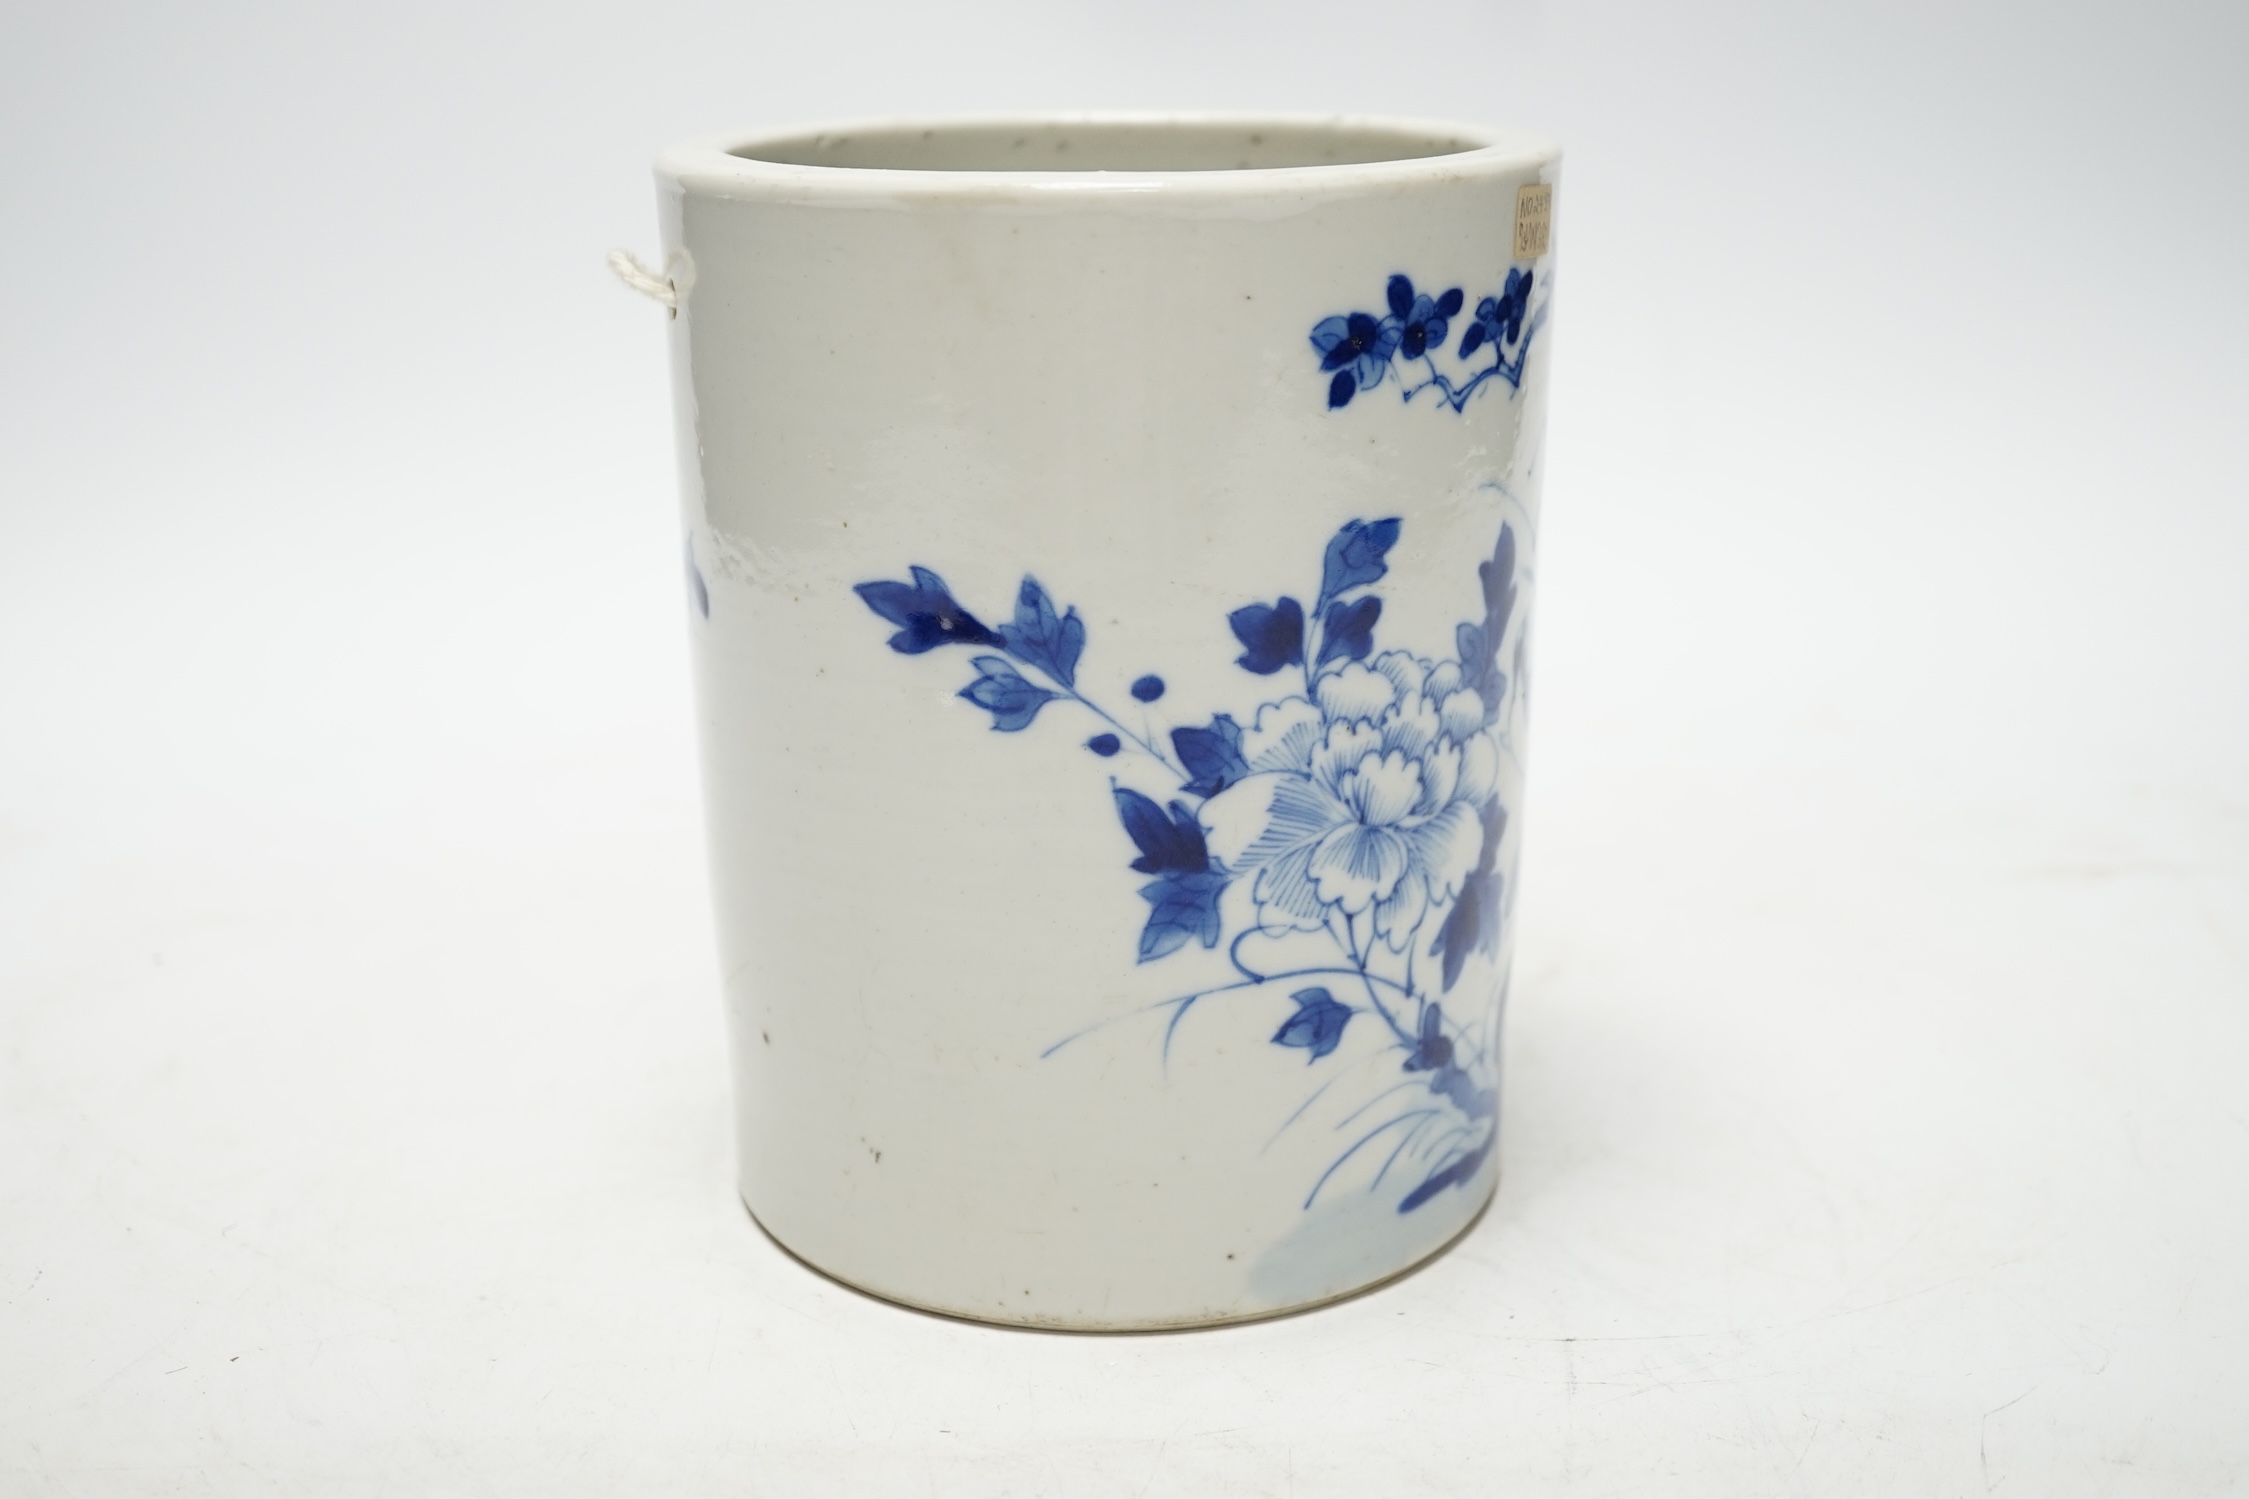 A 19th century Chinese cylindrical blue and white brushpot, later drilled holes, 15cm